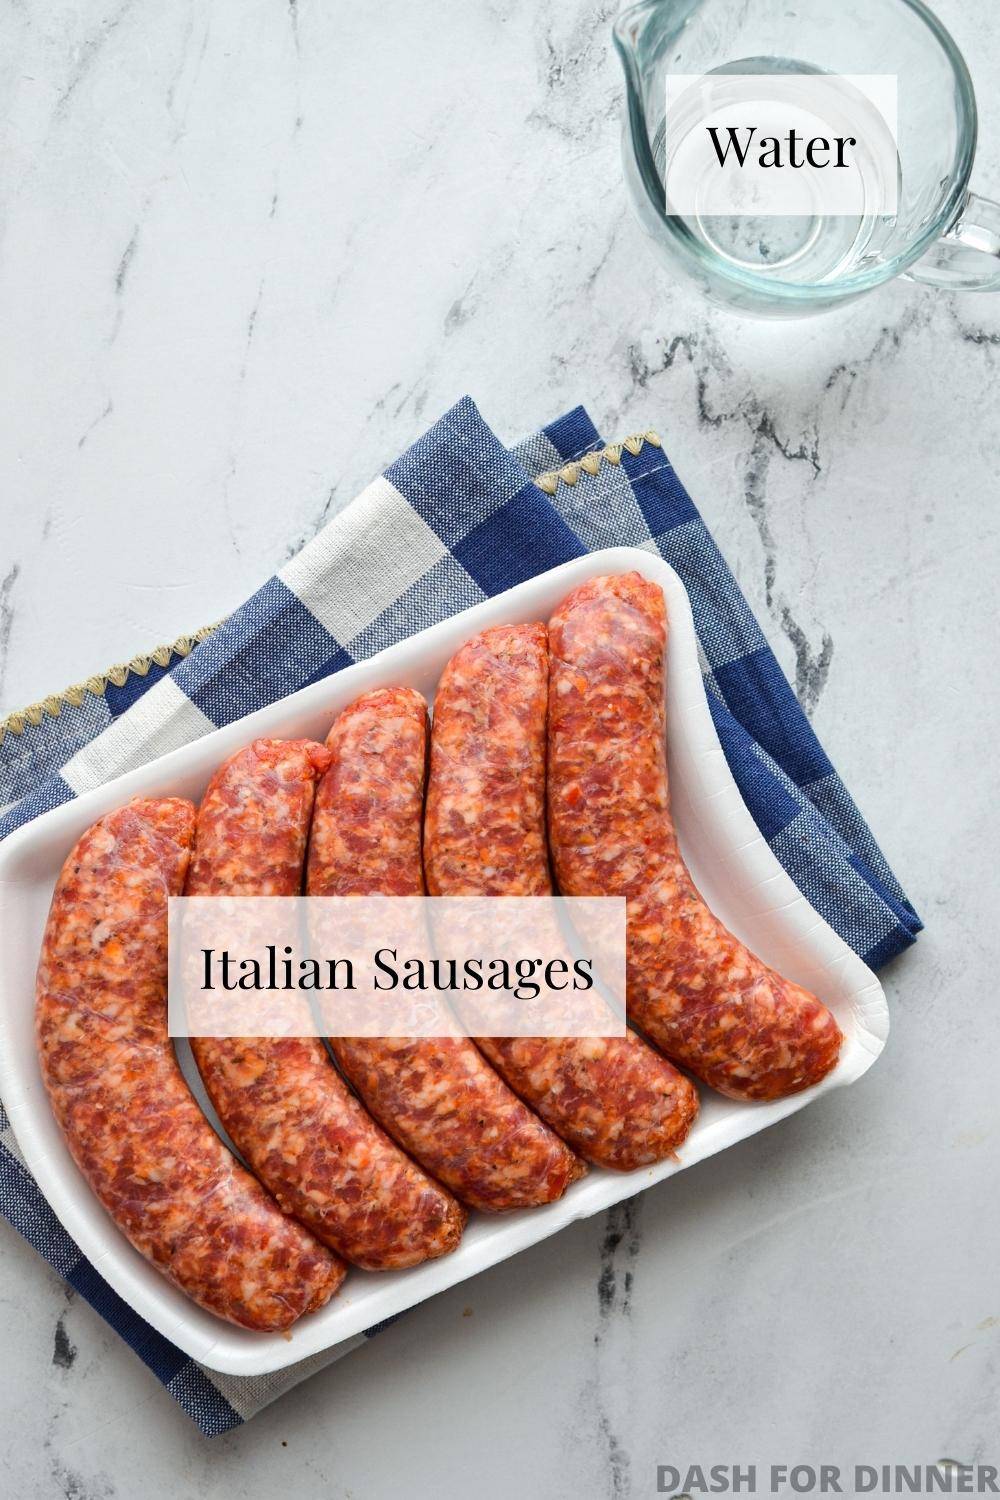 A package of Italian sausages and a small glass cup of water.